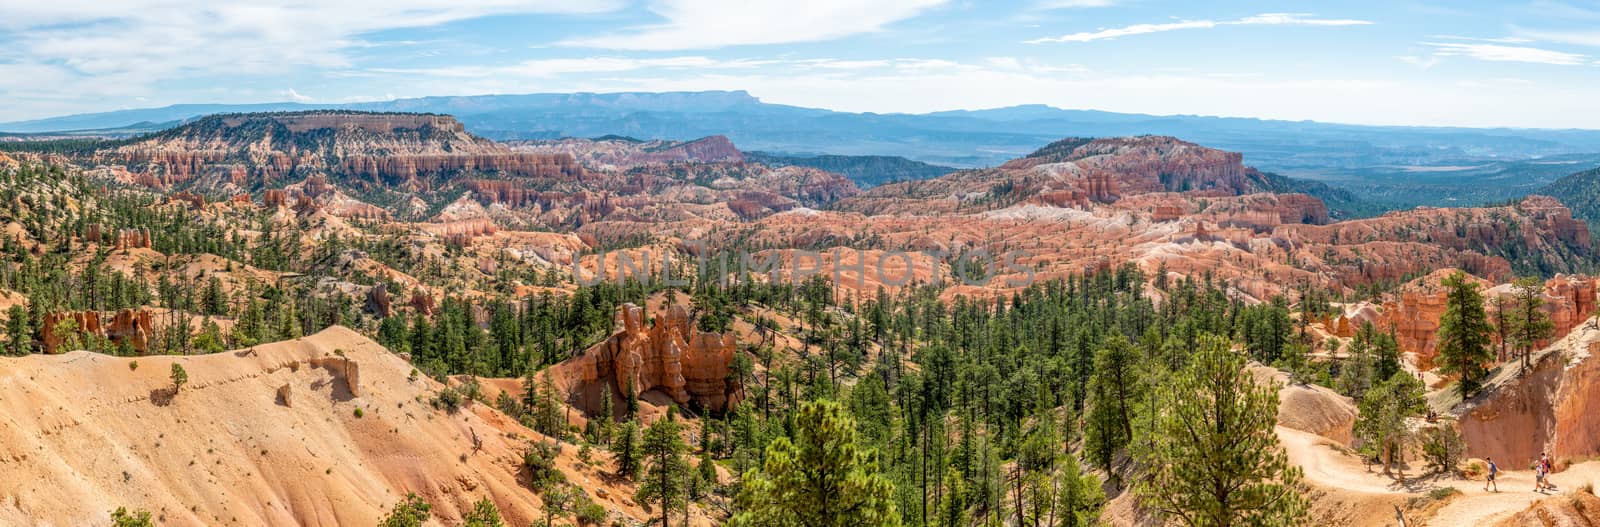 Panorama from Sunrise Point of Bryce Canyon National Park, Utah by Njean